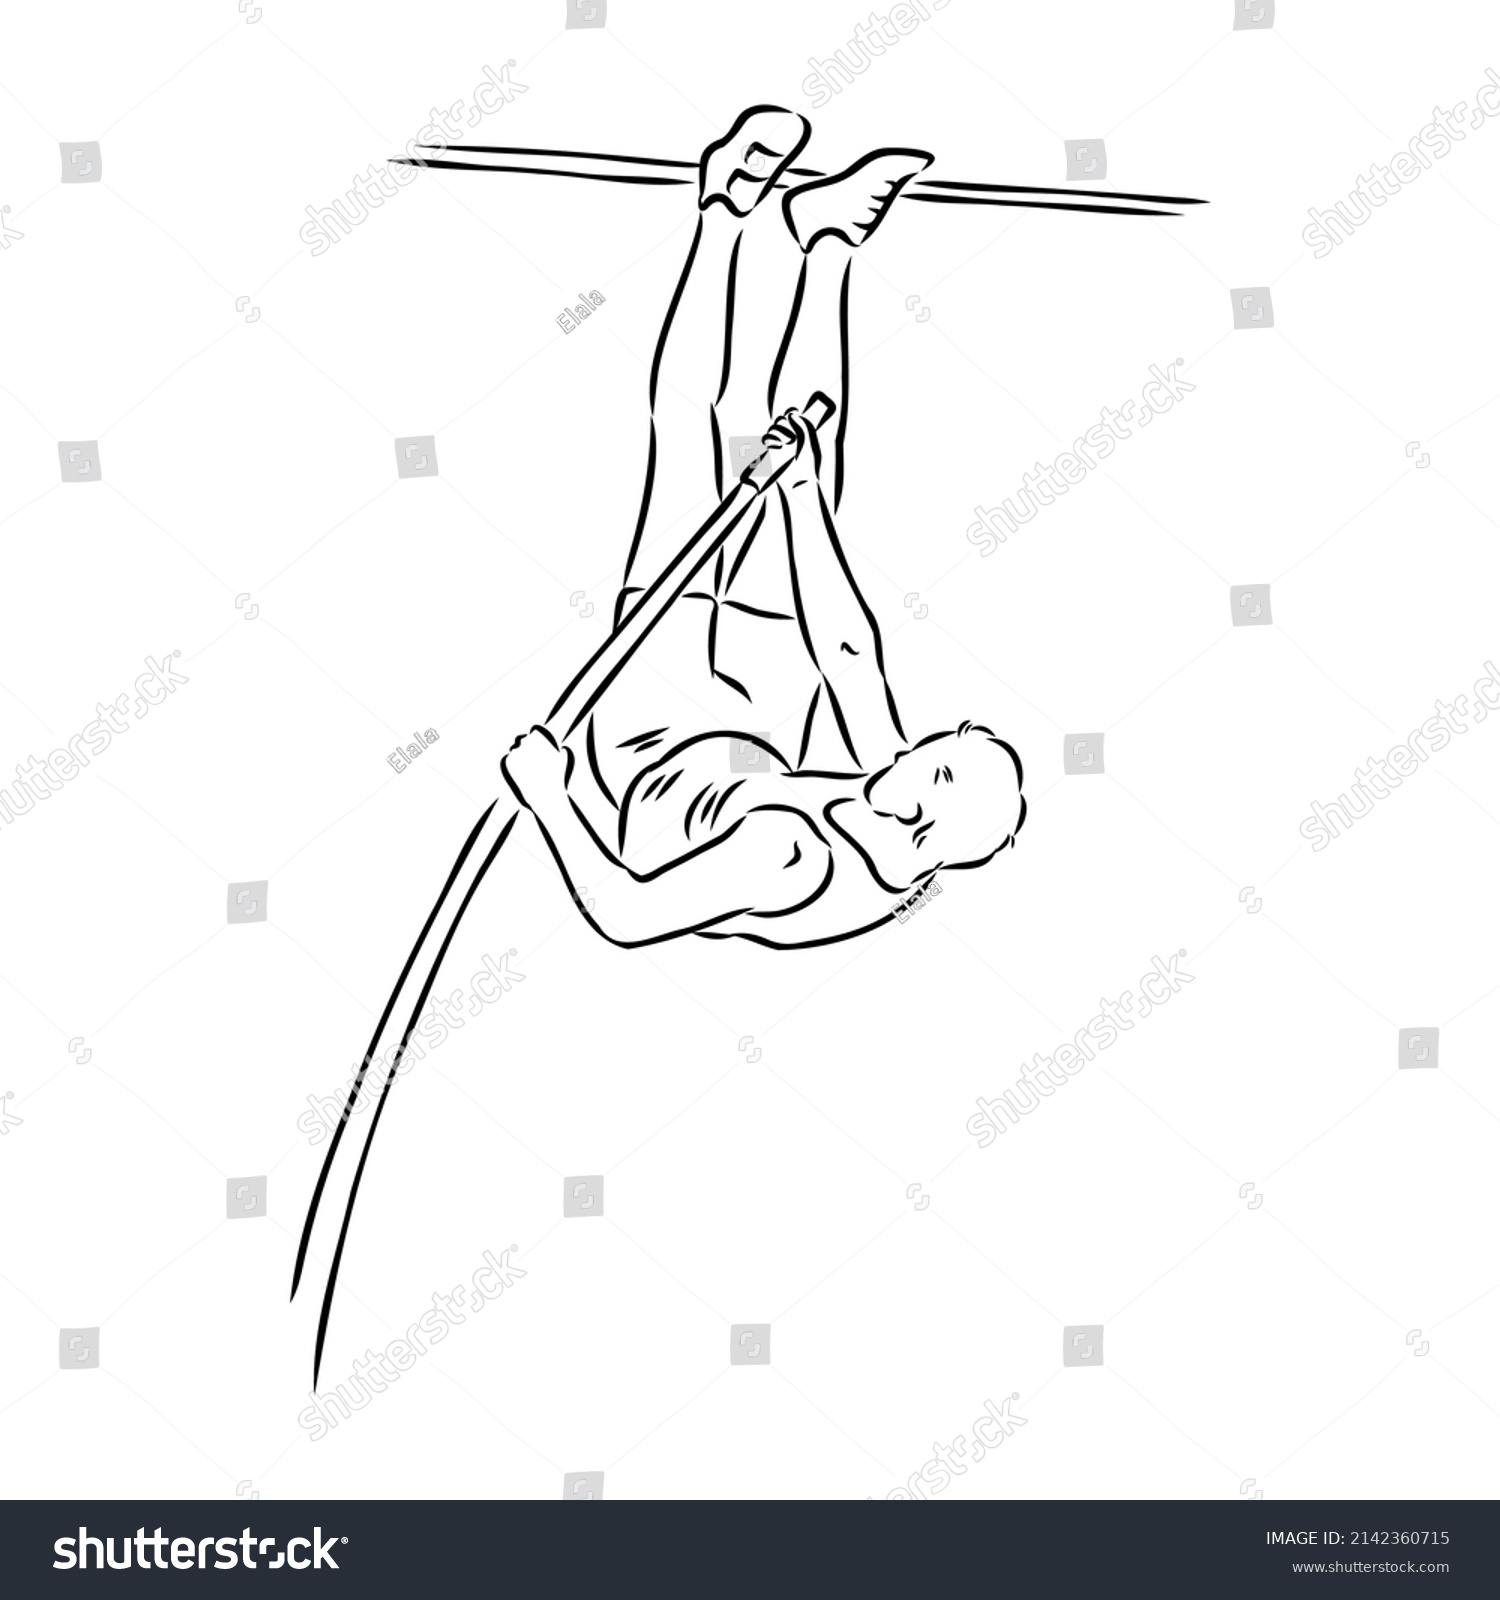 Continuous Line Drawing Athlete Pole Vault Stock Vector (Royalty Free ...